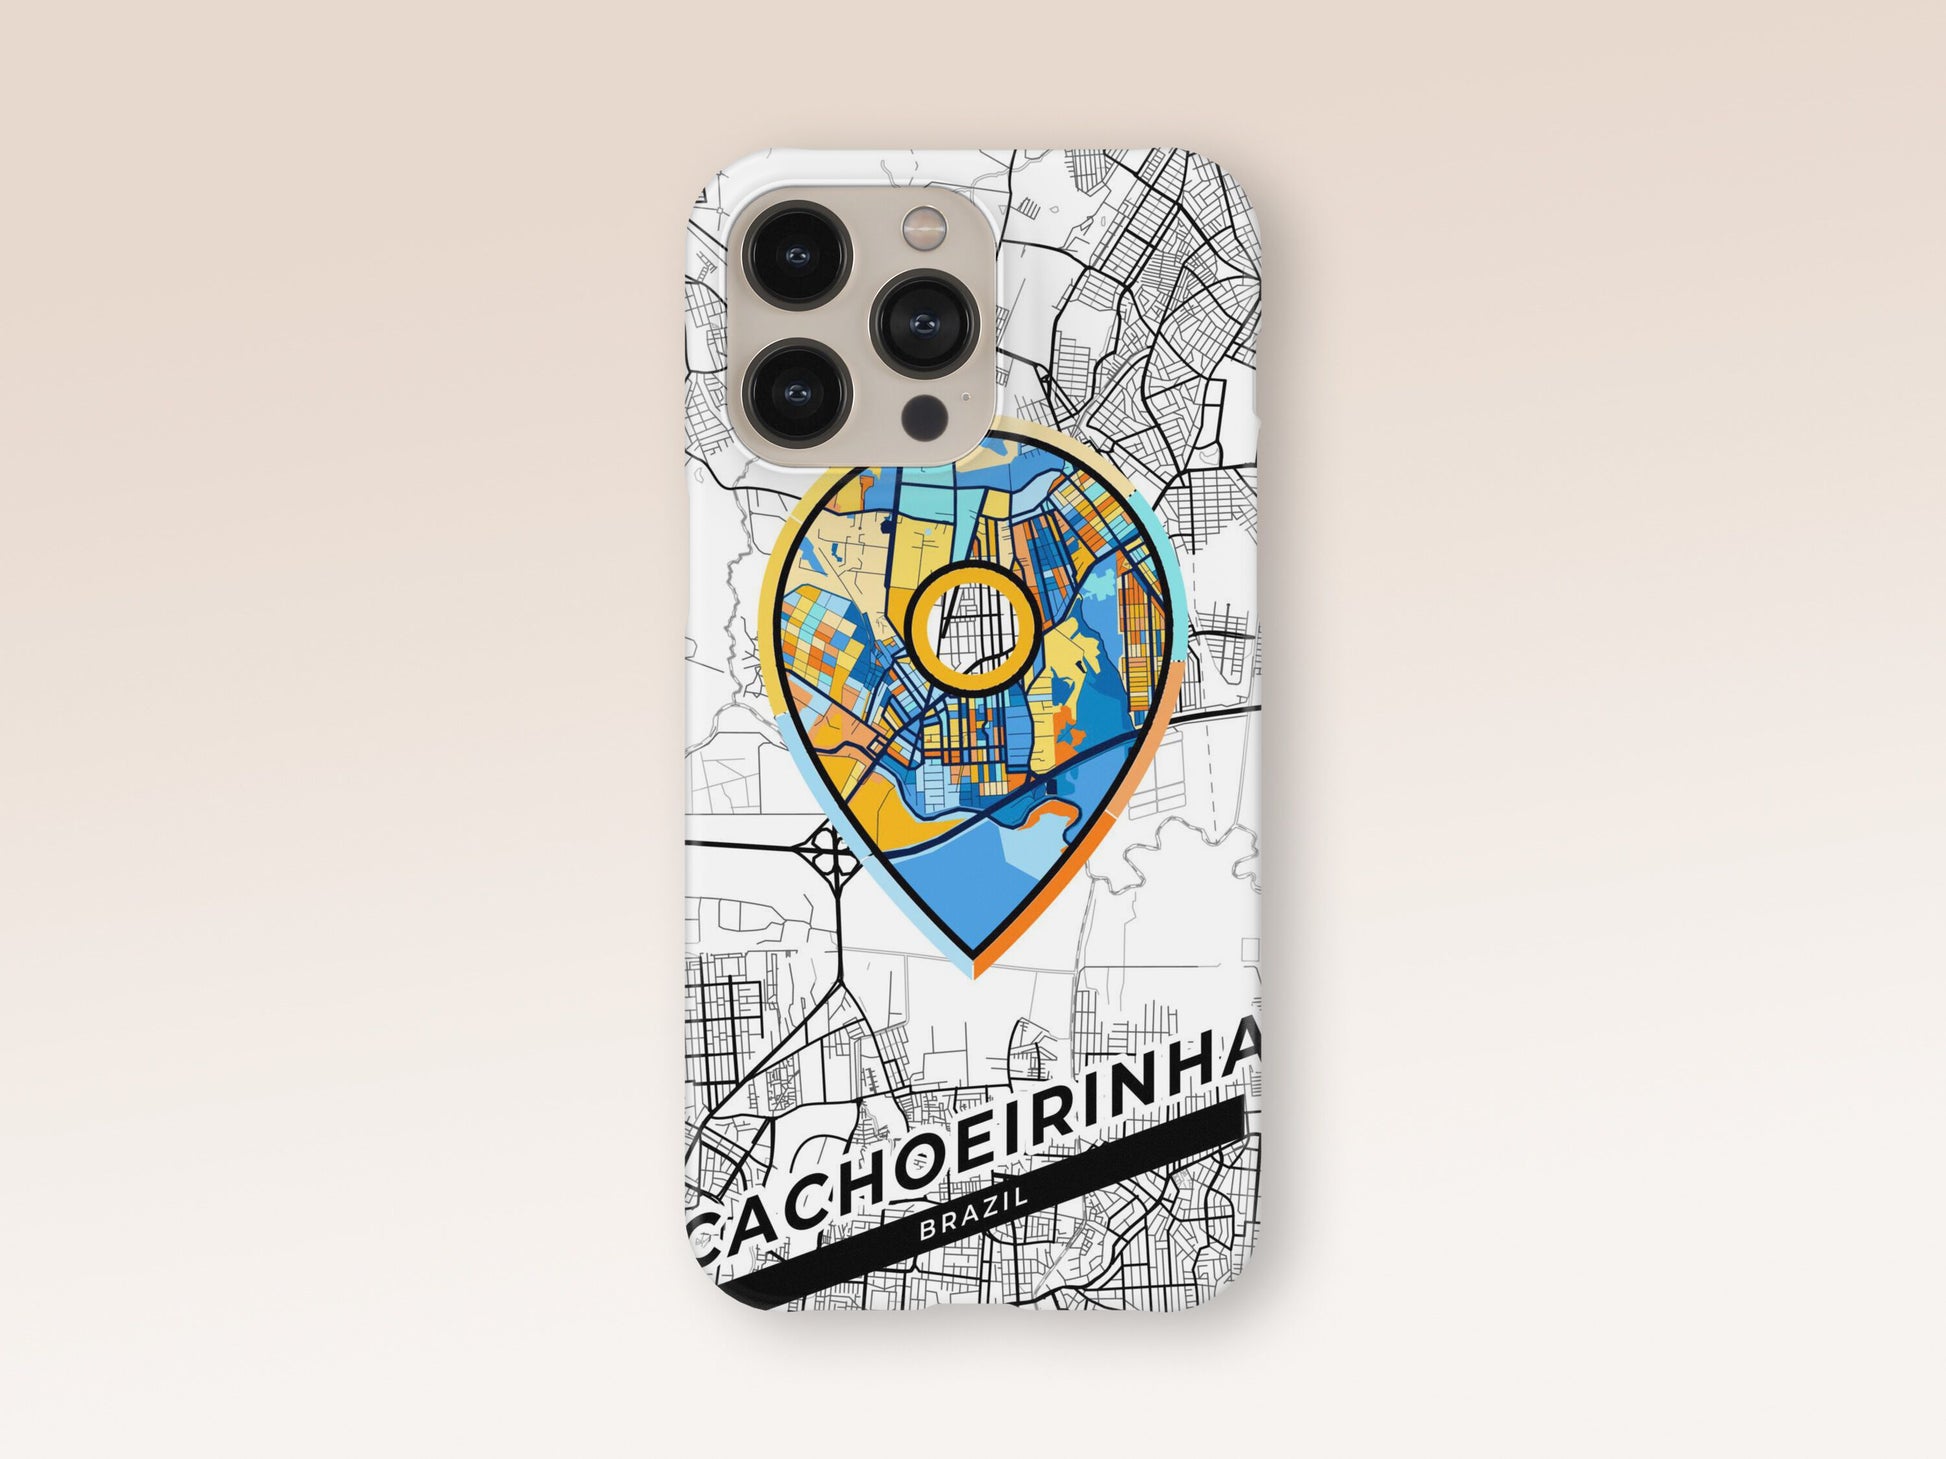 Cachoeirinha Brazil slim phone case with colorful icon. Birthday, wedding or housewarming gift. Couple match cases. 1